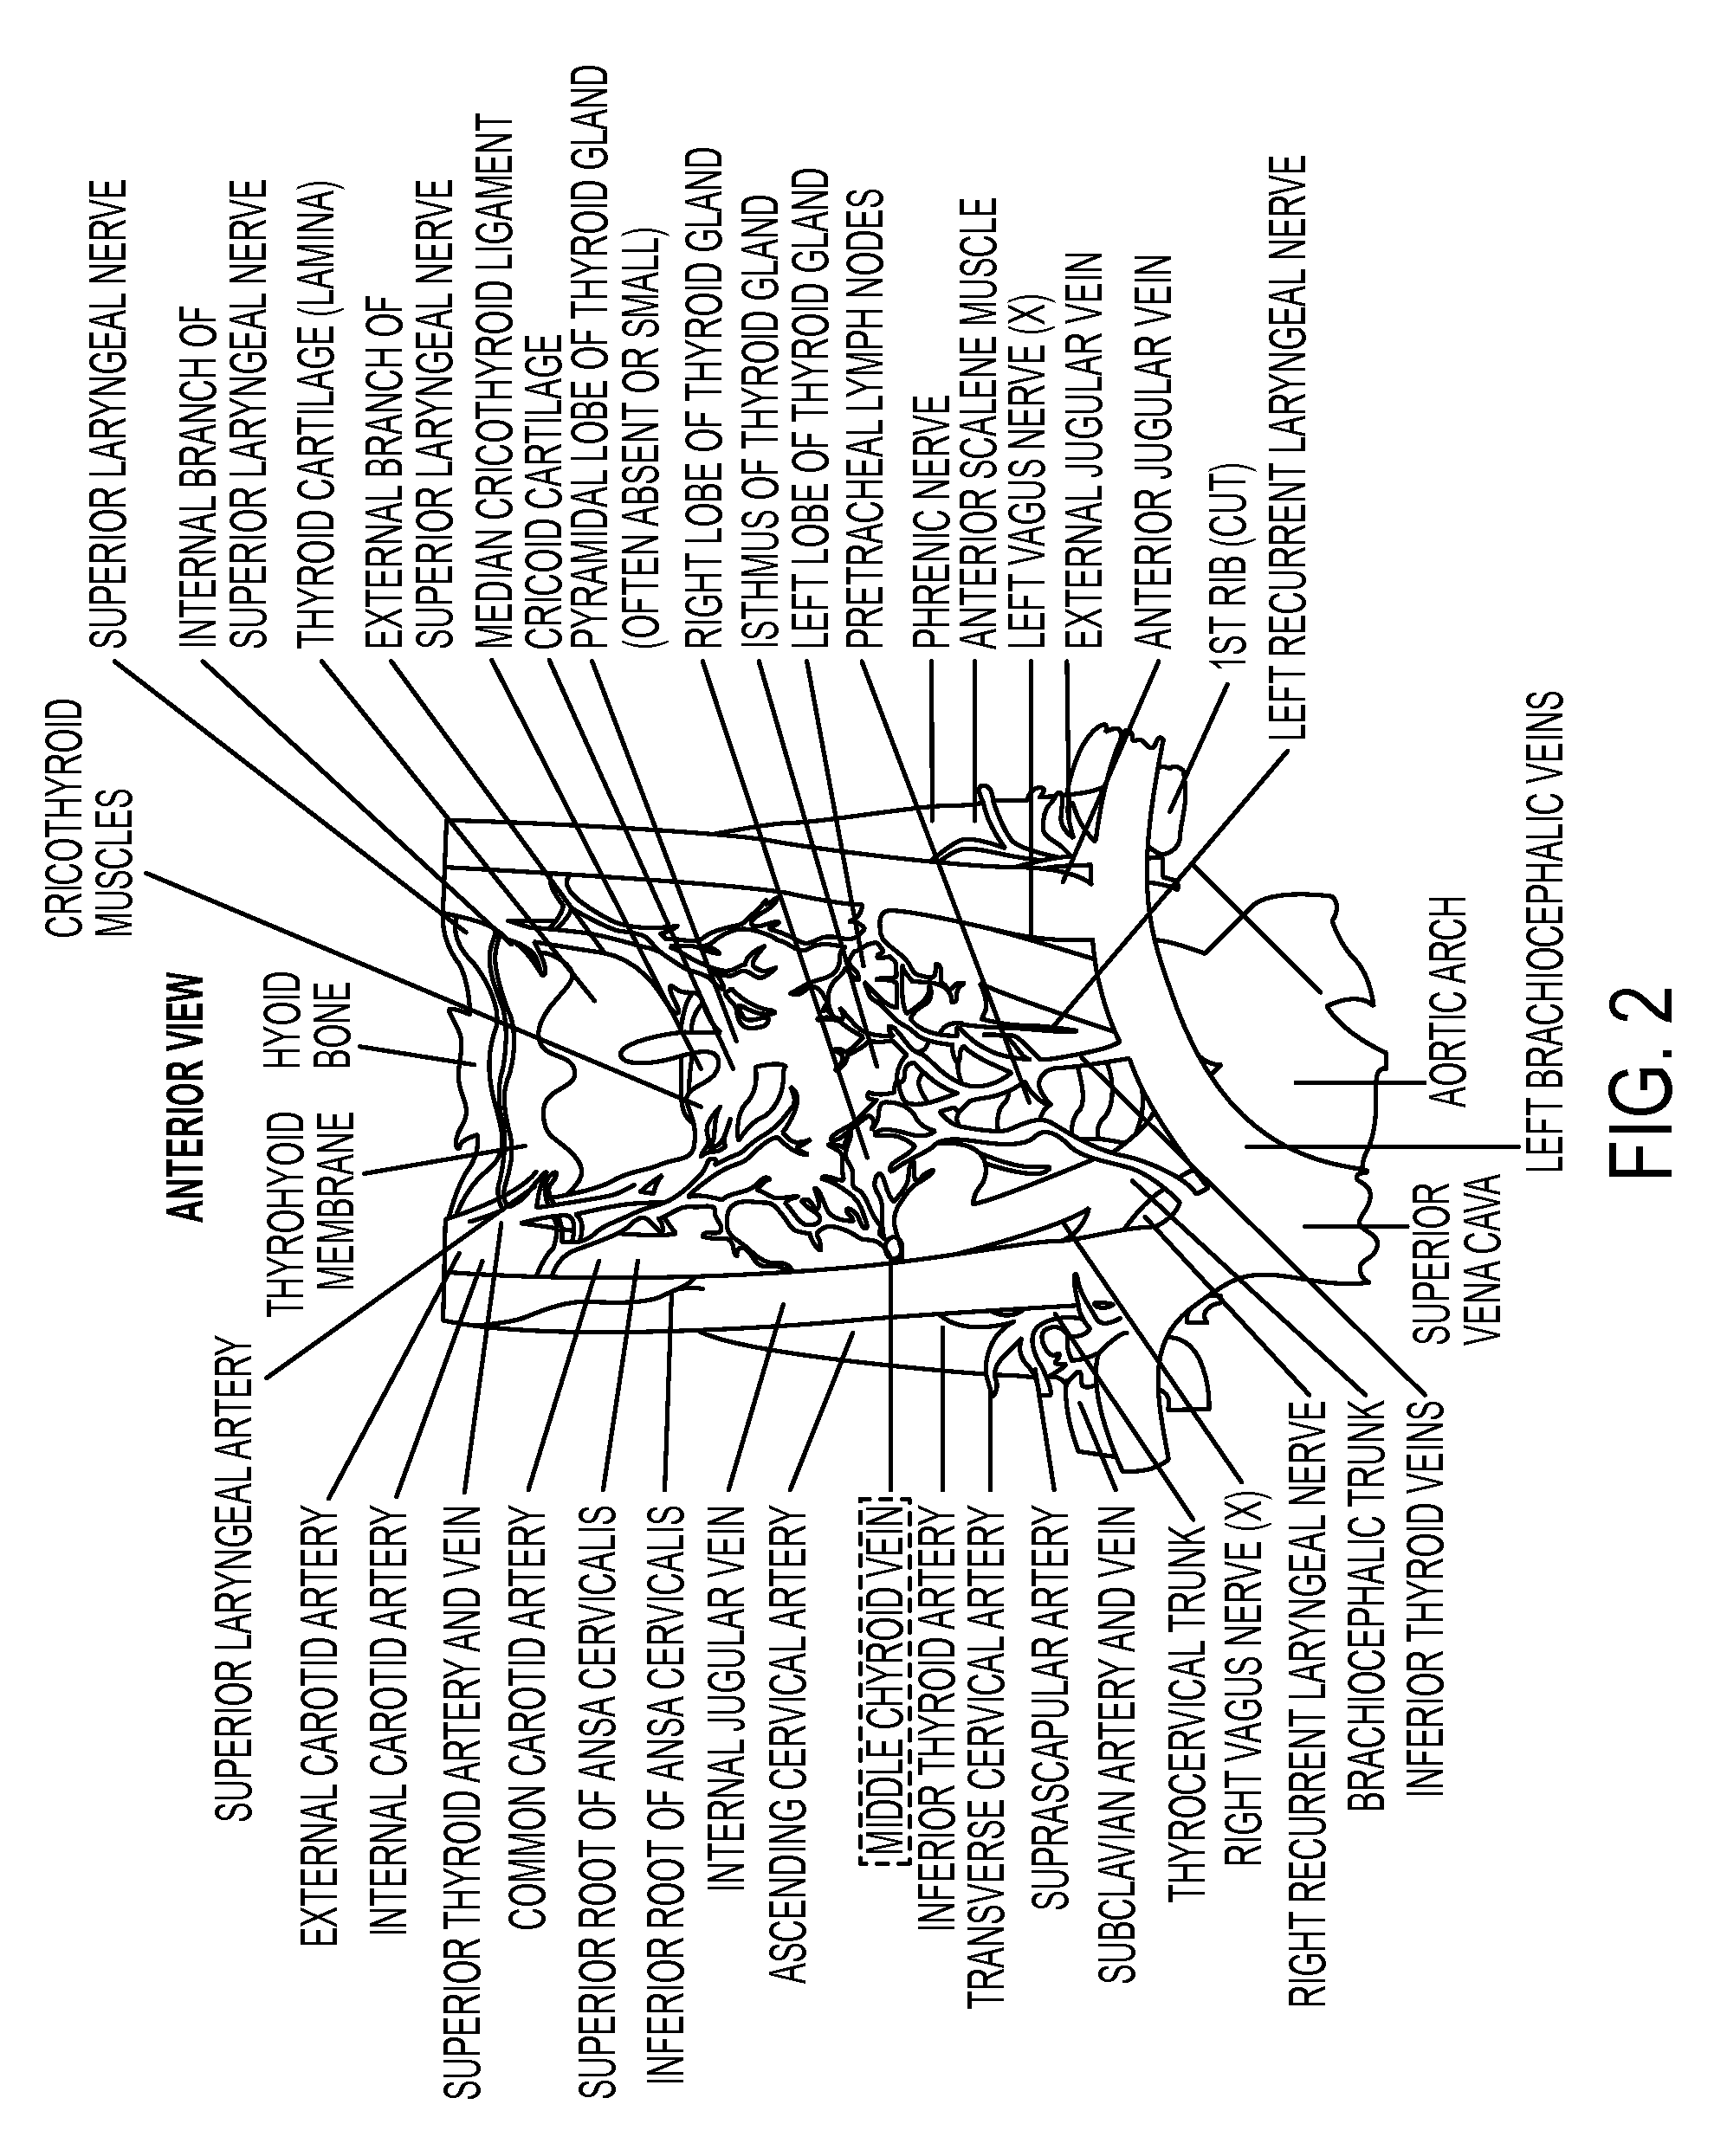 Method and System for Automatic Contrast Phase Classification